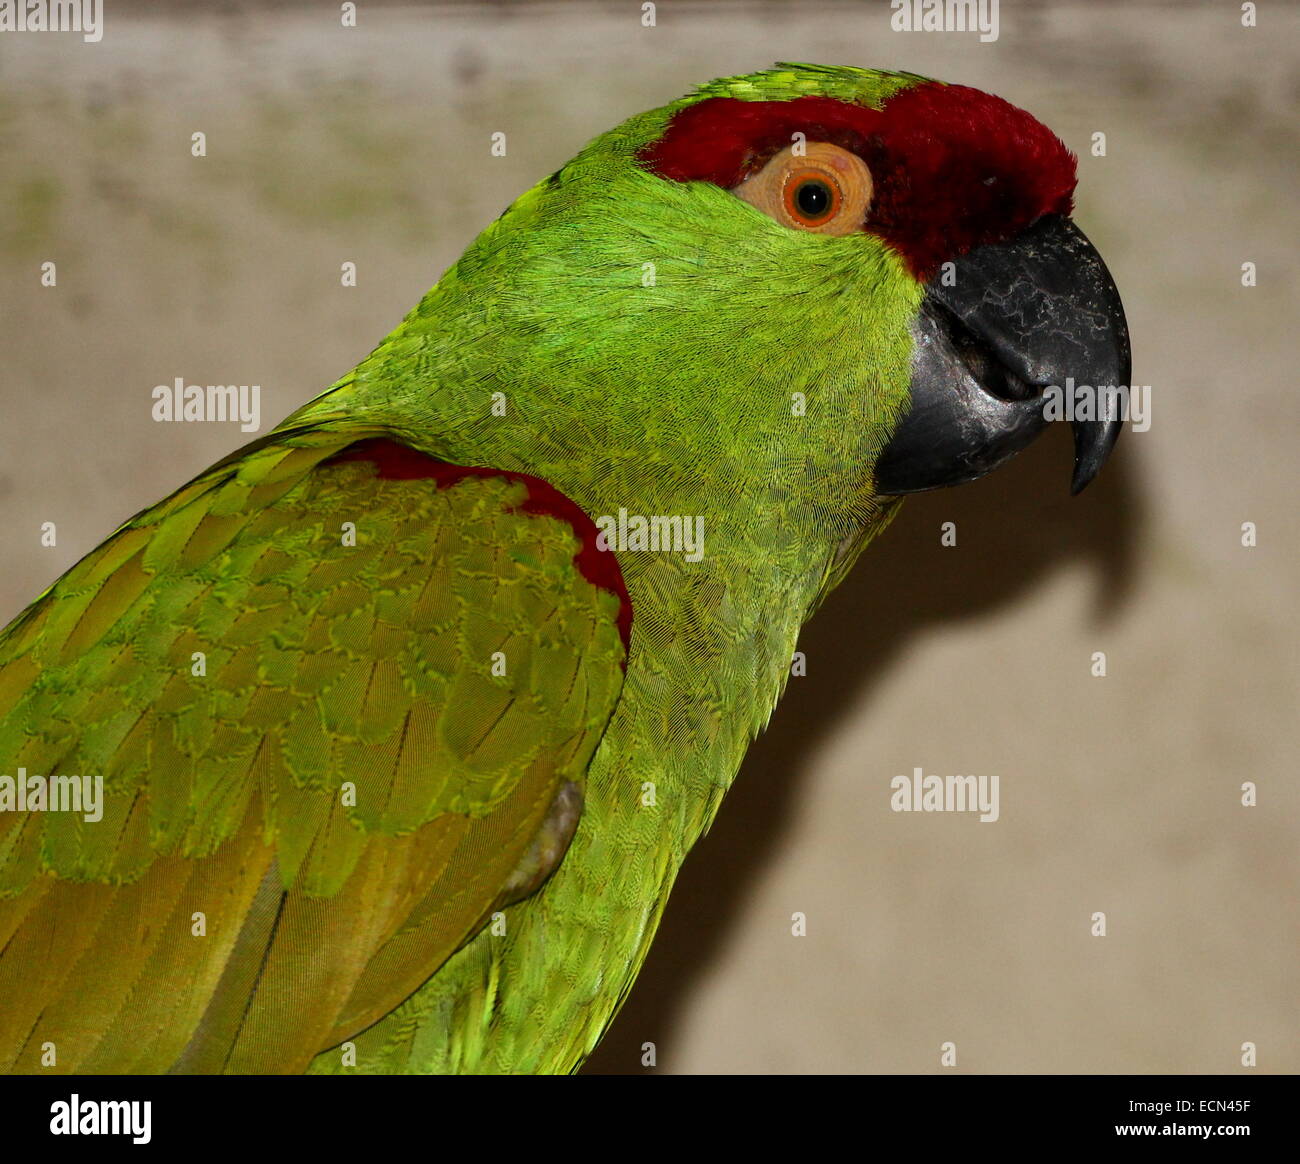 Mexican Thick-billed parrot (Rhynchopsitta pachyrhyncha), found primarily in the Sierra Madre Occidental mountain range Stock Photo